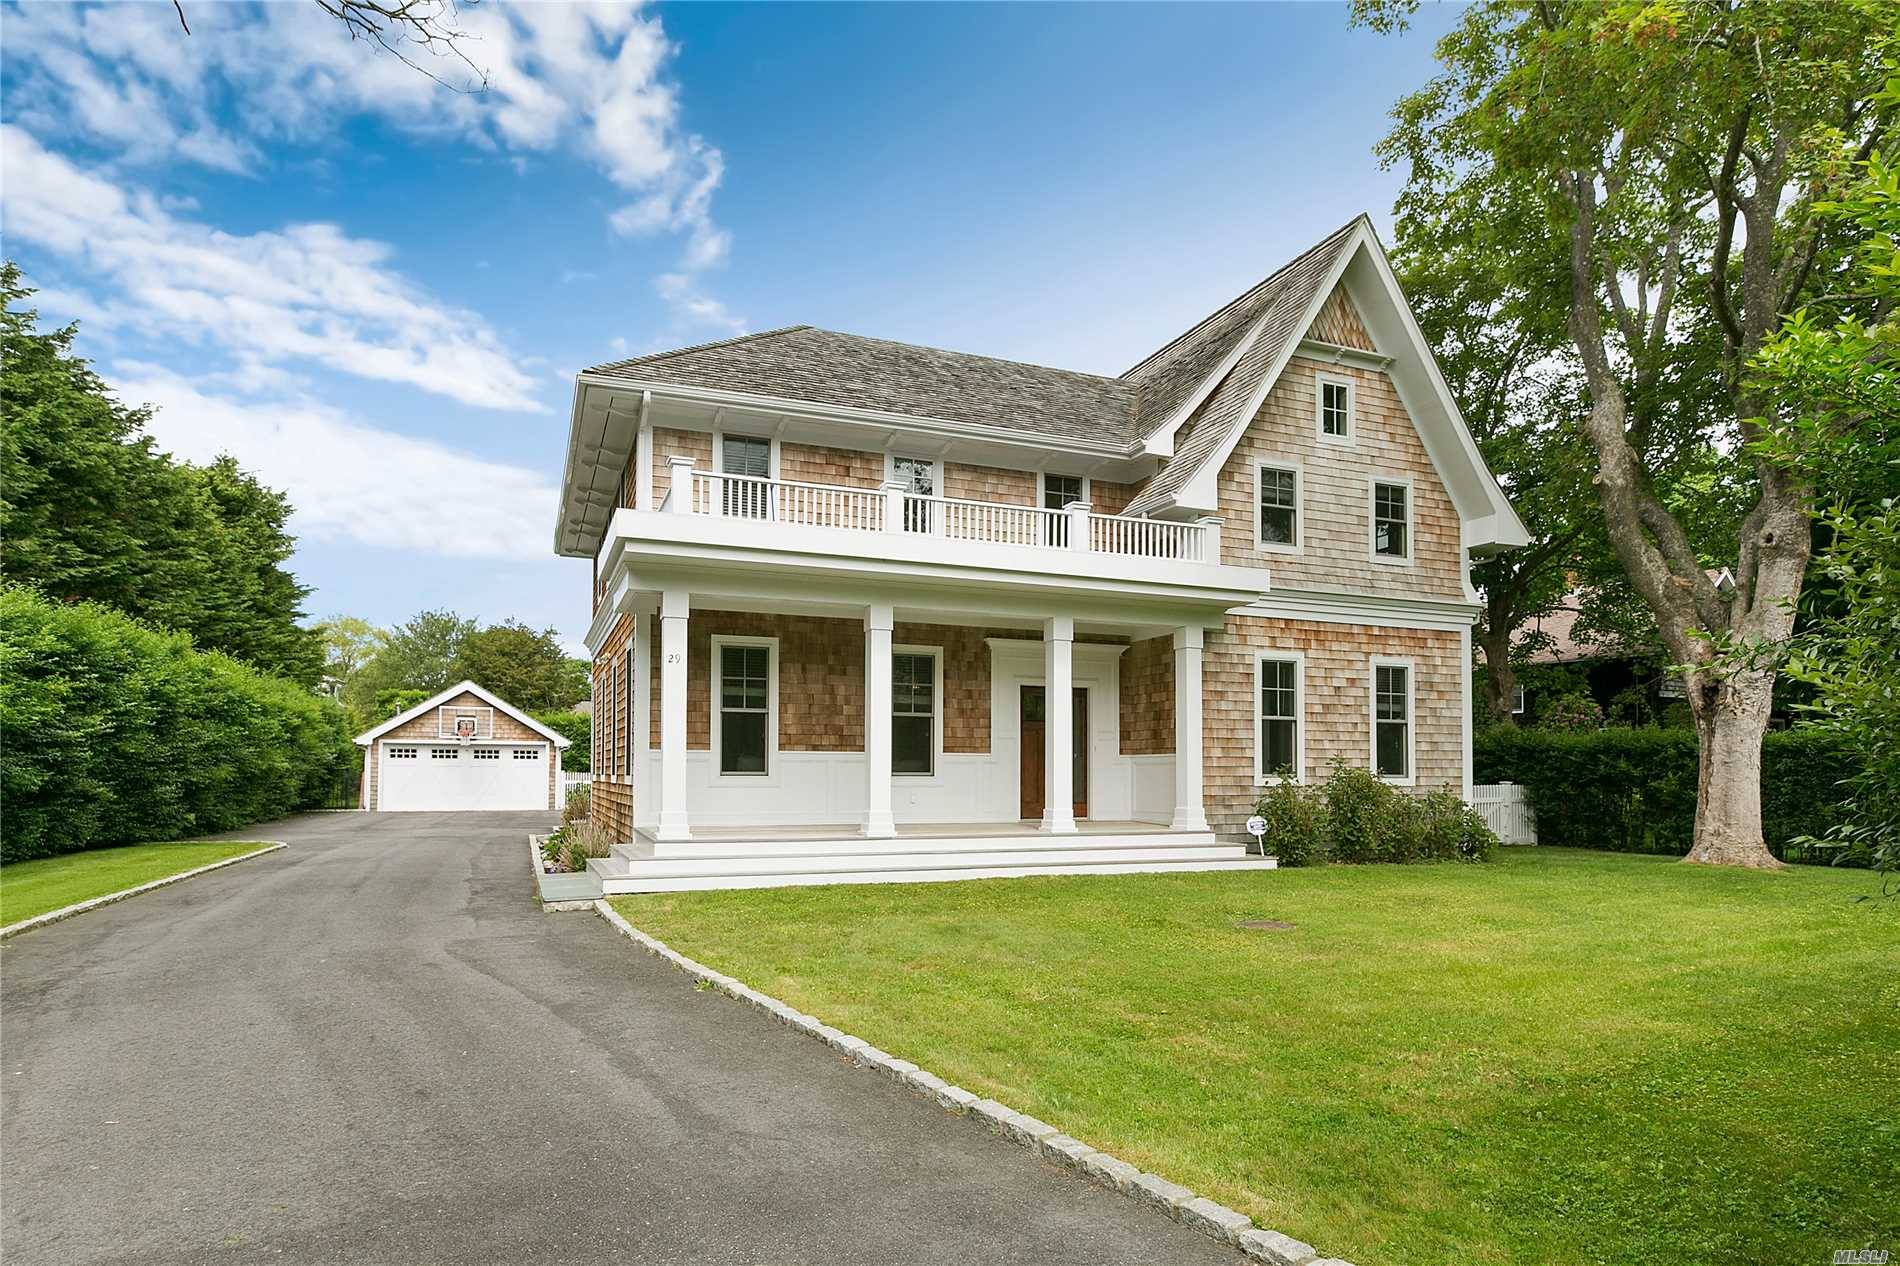 Elegant Details Abound In This 3700+ S Ft Southampton Village Traditional.